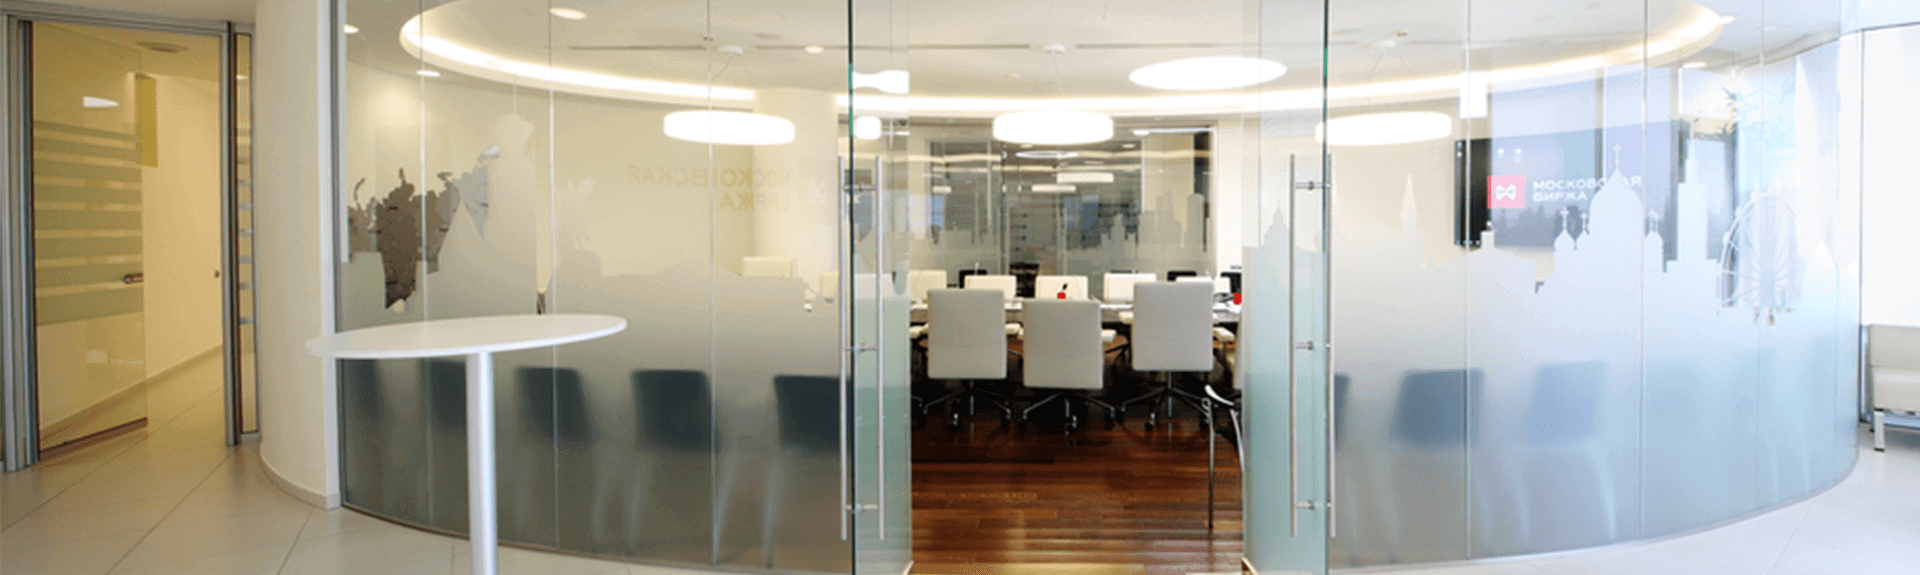 Benefits of Frosted Glass in Office